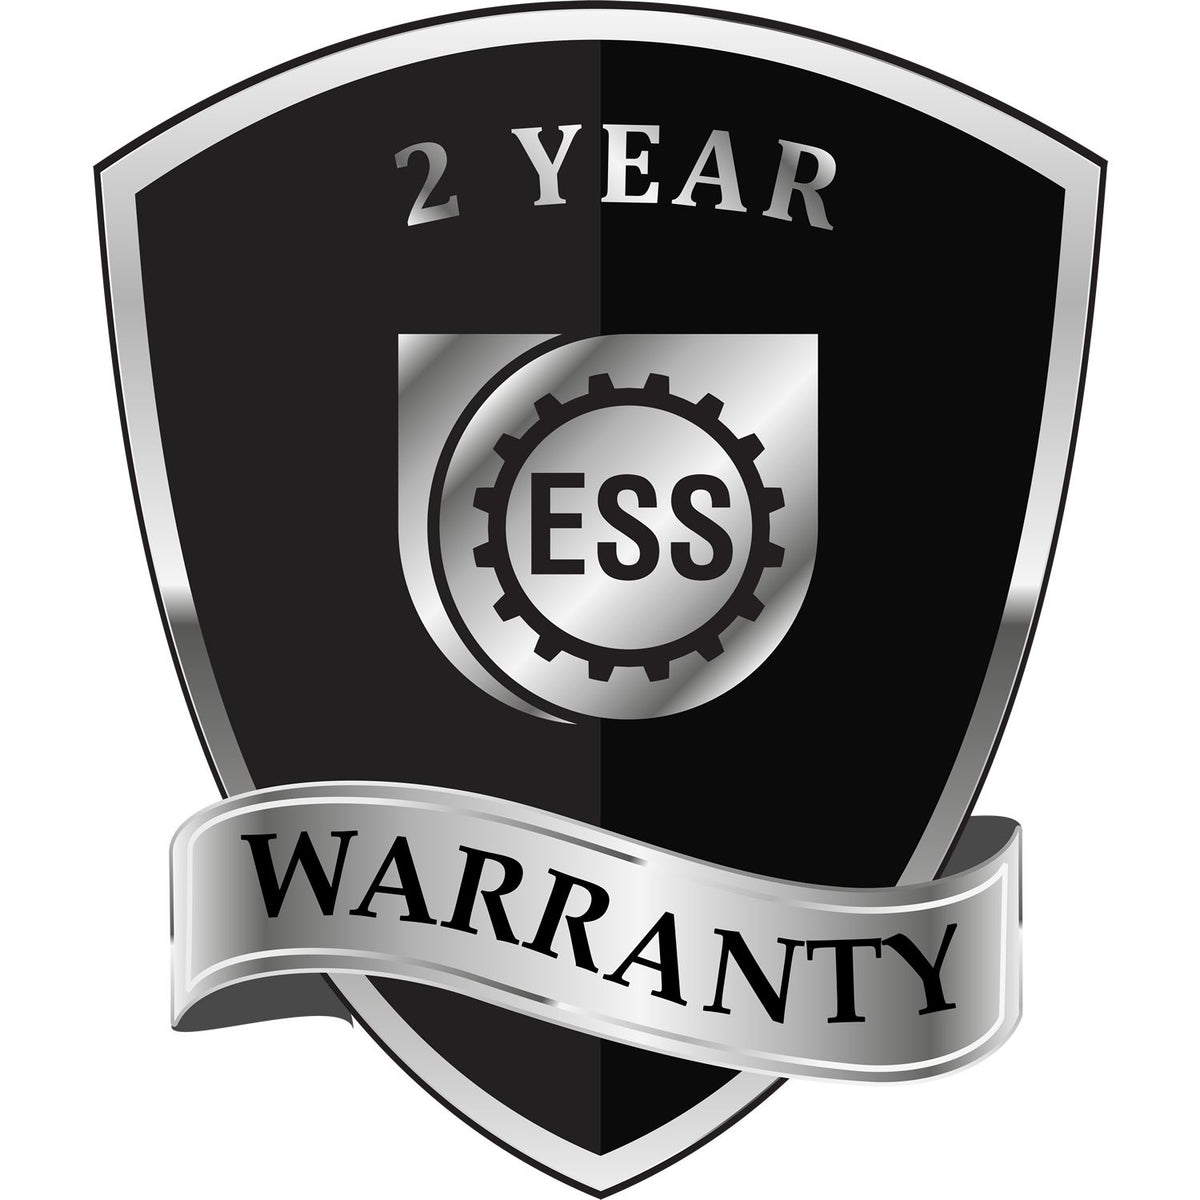 A badge or emblem showing a warranty icon for the Extended Long Reach Idaho Architect Seal Embosser